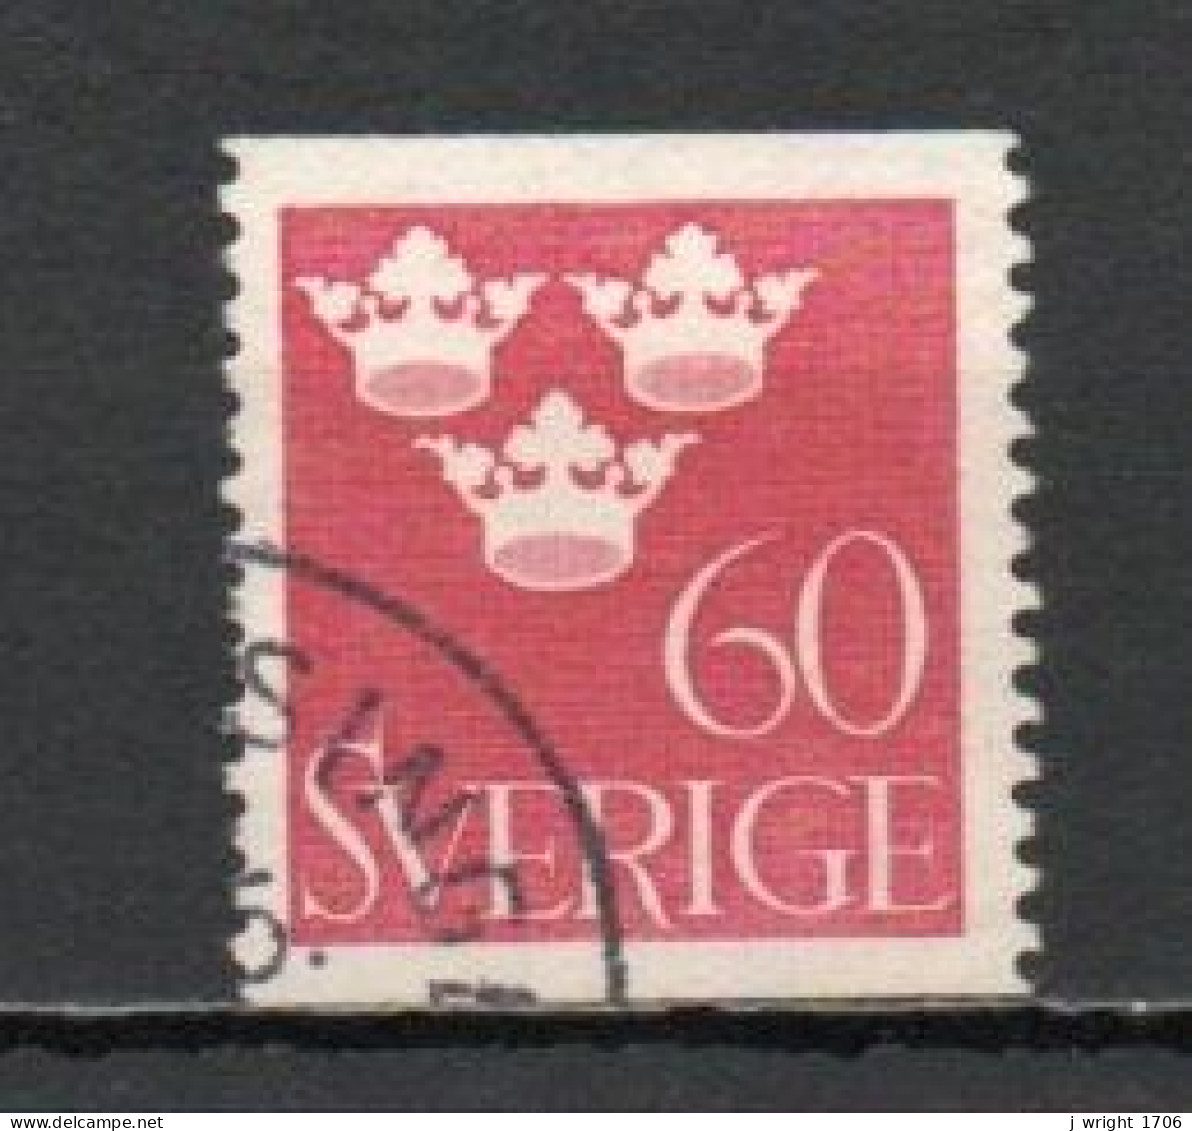 Sweden, 1939, Three Crowns, 60ö, USED - Used Stamps